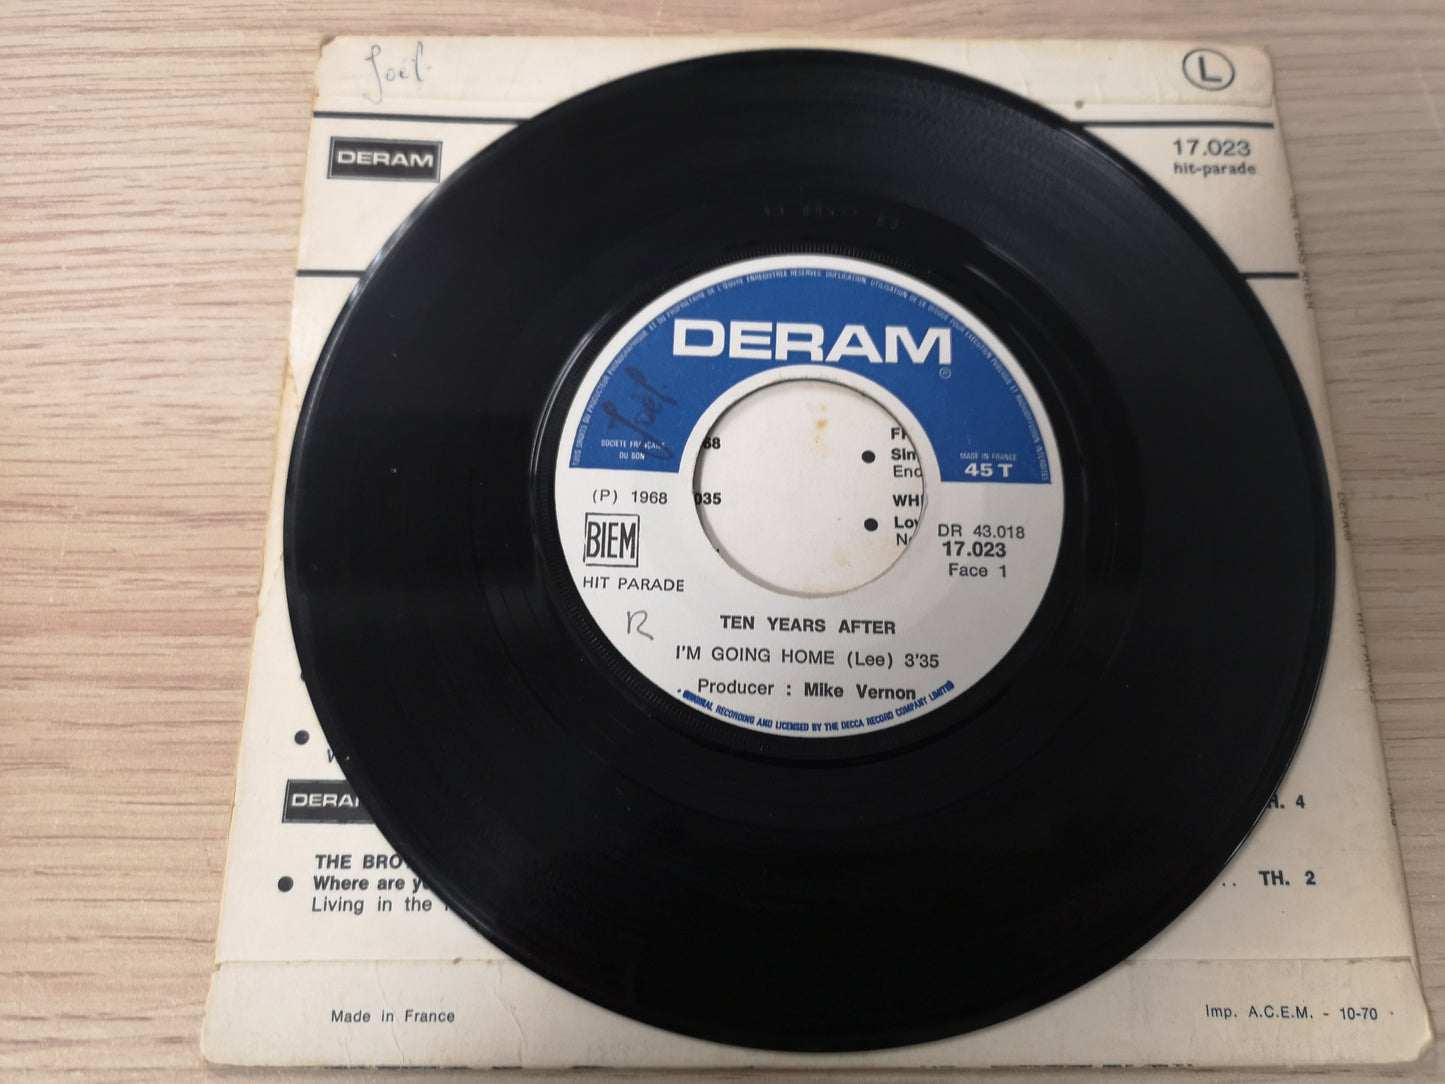 Ten Years After "I'm Going Home" Orig France 1970 VG/VG (7" Single)